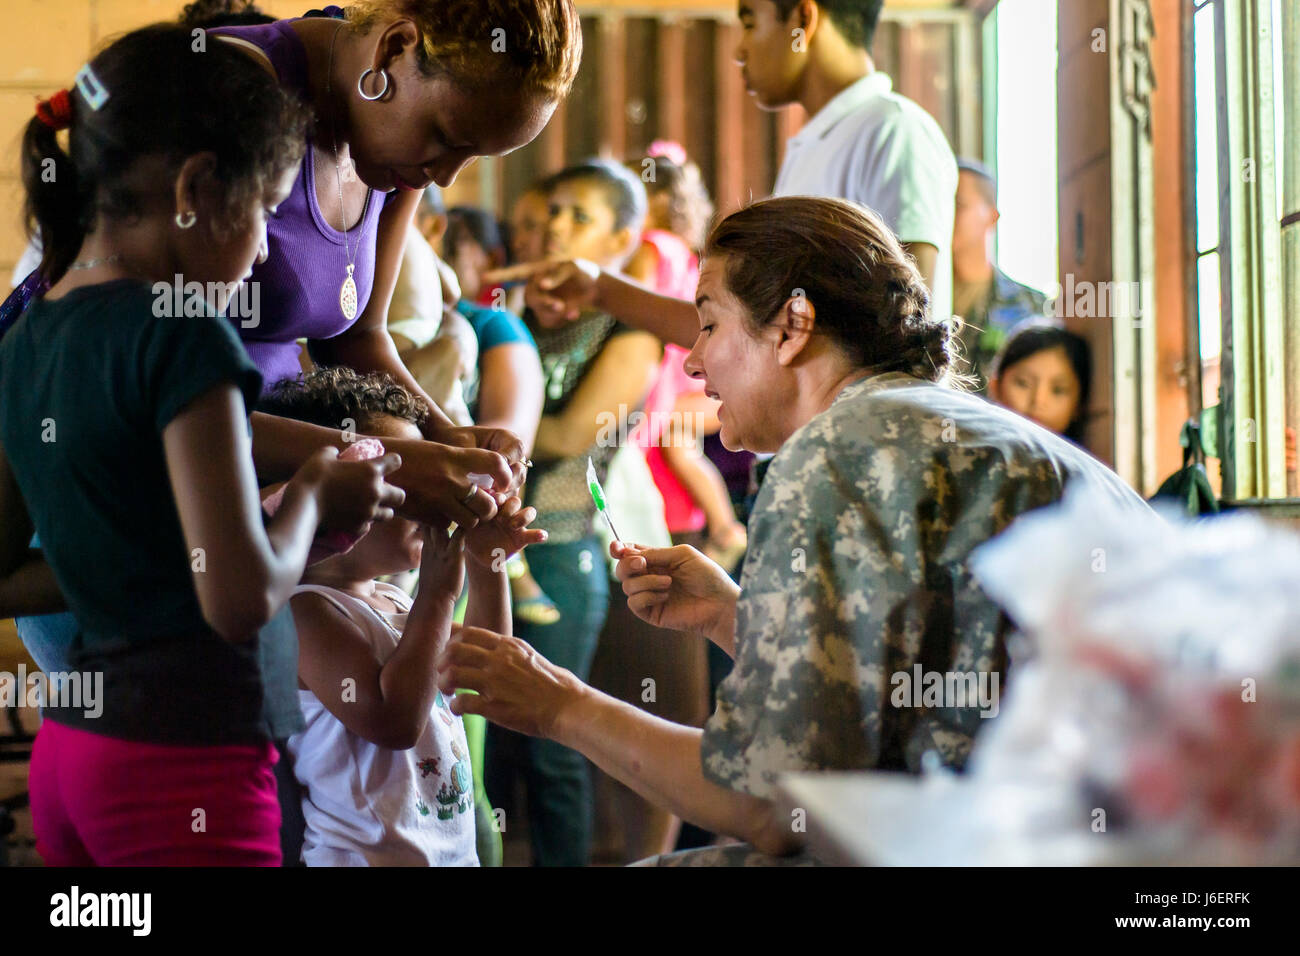 U.S. Army LTC. Rhonda Dyer provides deworming and preventative medication to Hondurans at a Medical Readiness Training Exercise site at Cooperativa village, Colon, Honduras , Apr. 21, 2017. Joint Task Force – Bravo Medical Element, provided care to more than 850 patients during a Medical Readiness Training Exercise in Cooperativa village, Colon, Honduras, Apr. 20-21, 2017. MEDEL also supported a Military Partnership Engagement and assisted more than 650 patients with the Hondurian Navy in Santa Rosa de Aguan, Colon, Honduras, Apr. 22, 2017. (U.S. Air National Guard photo by Master Sgt. Scott T Stock Photo